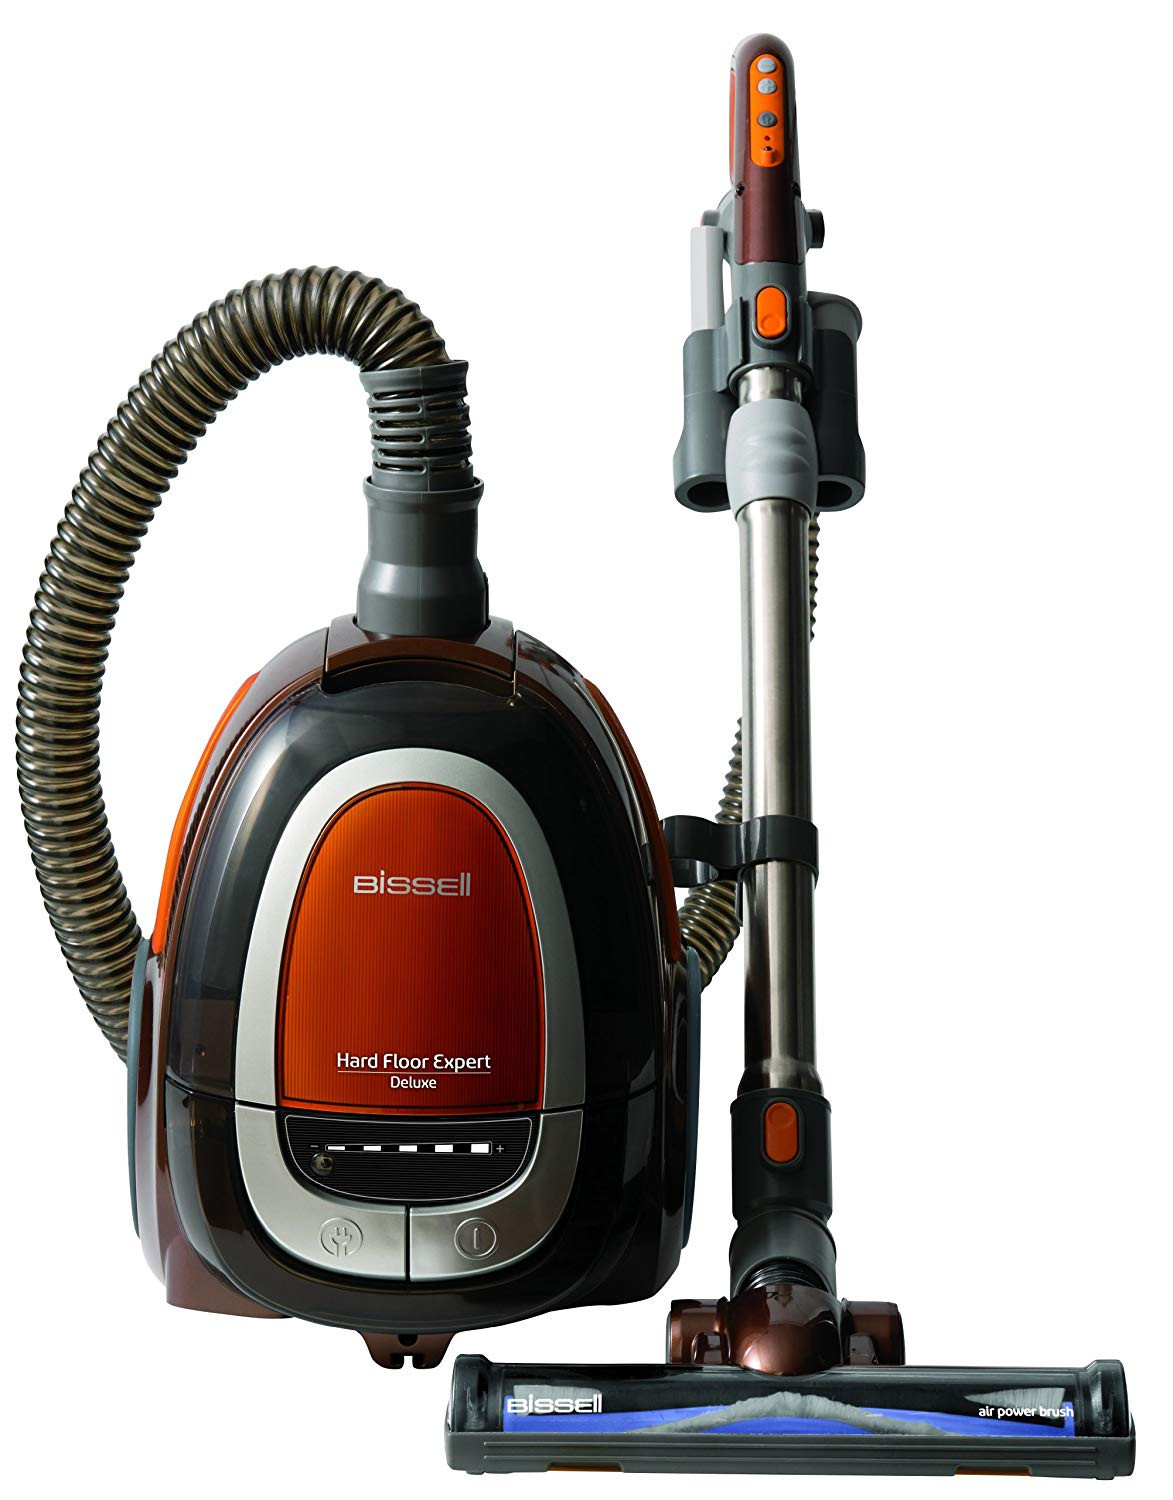 12 Lovable Hardwood Floor Vacuum and Steam Cleaner Reviews 2024 free download hardwood floor vacuum and steam cleaner reviews of amazon com bissell hard floor expert deluxe canister vacuum with amazon com bissell hard floor expert deluxe canister vacuum cleaner machin